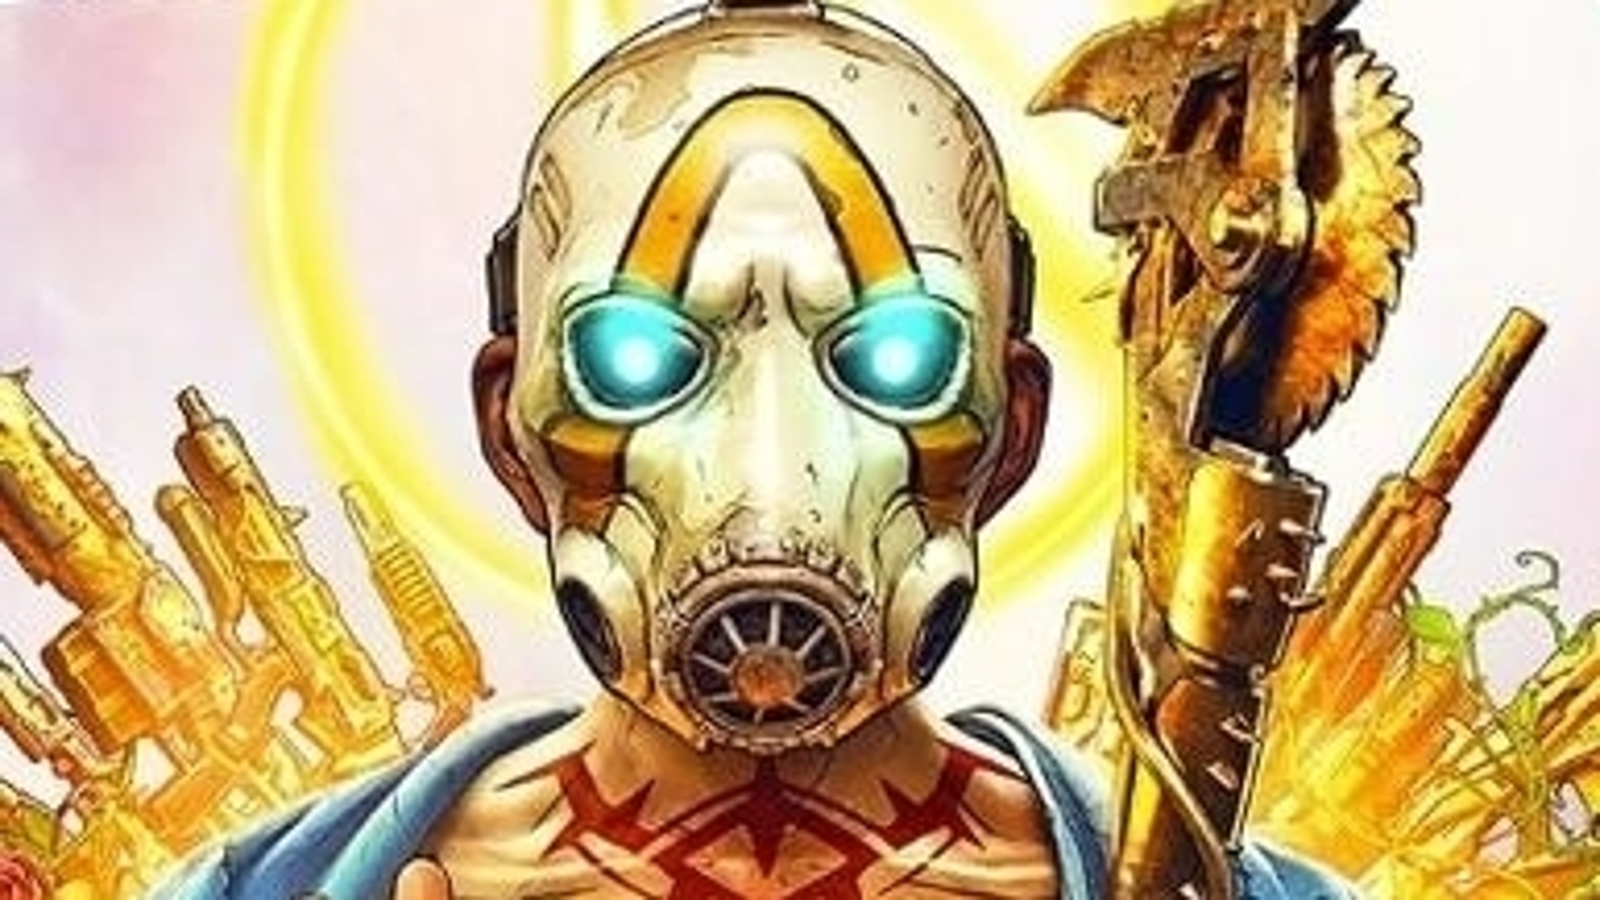 https://assetsio.reedpopcdn.com/borderlands-3-walkthrough-guide-tips-story-chapters-6039-1568730246876.jpg?width=1600&height=900&fit=crop&quality=100&format=png&enable=upscale&auto=webp